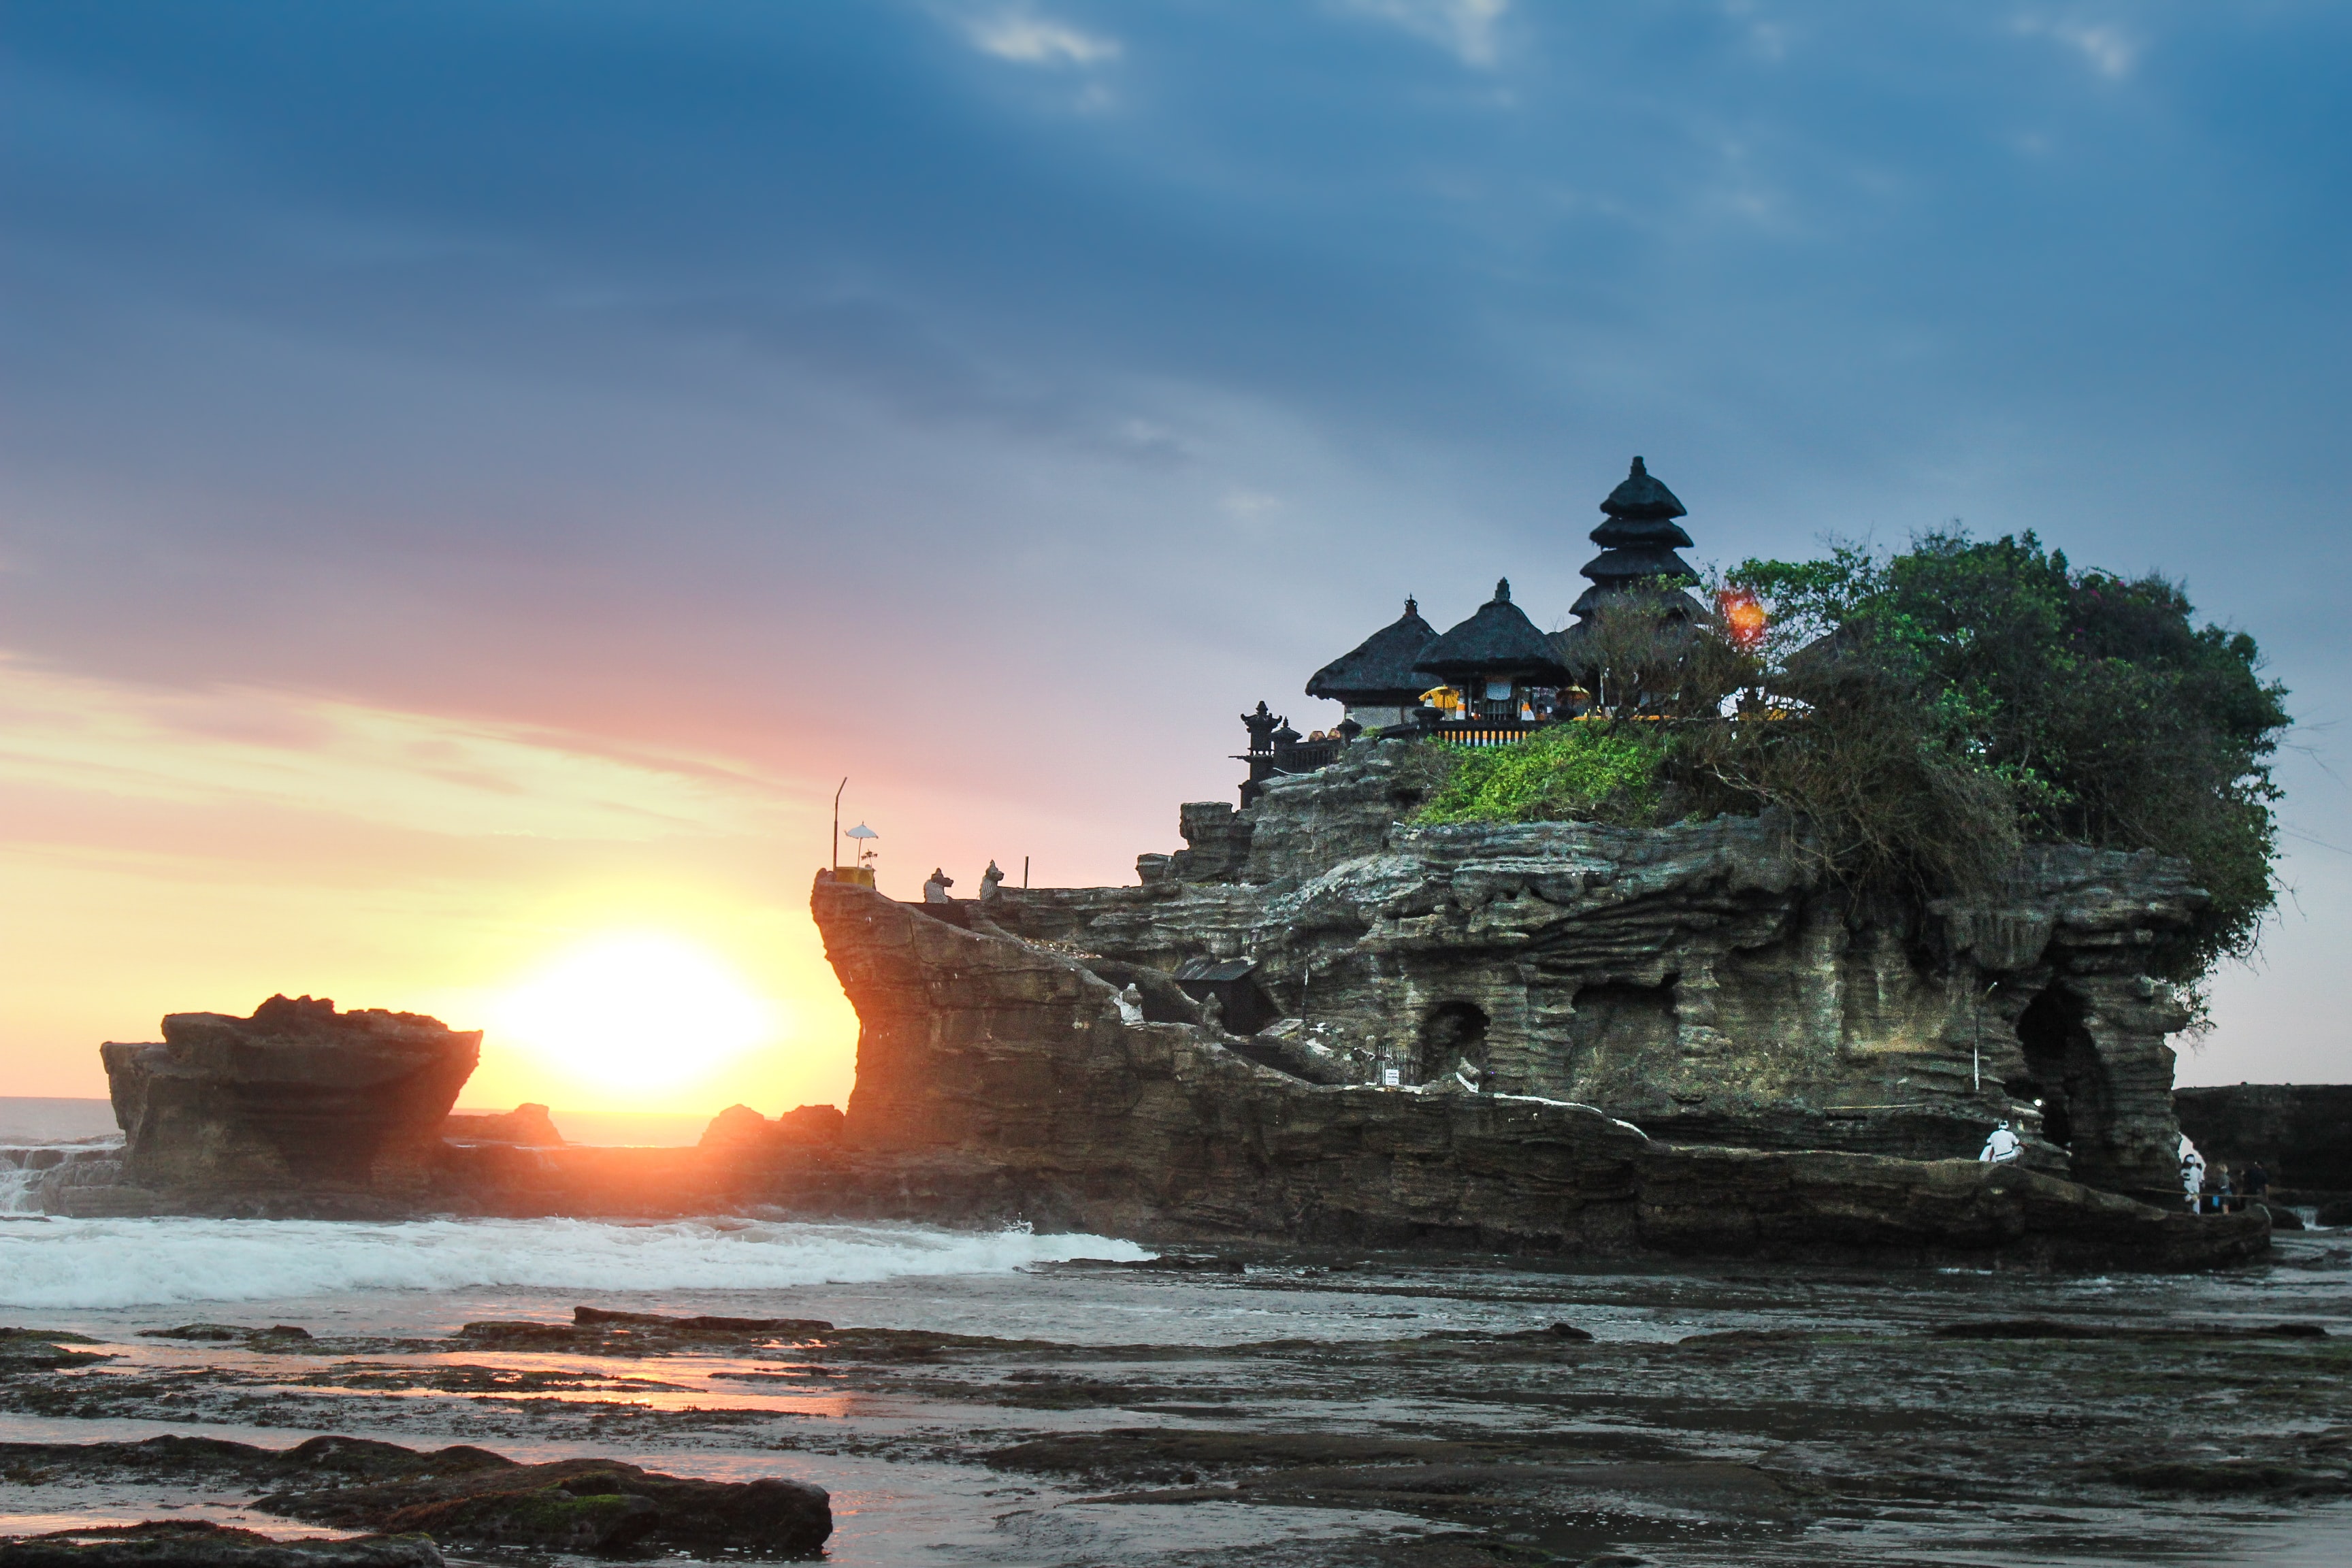 A View of temple in Bali well known for the sunset’s